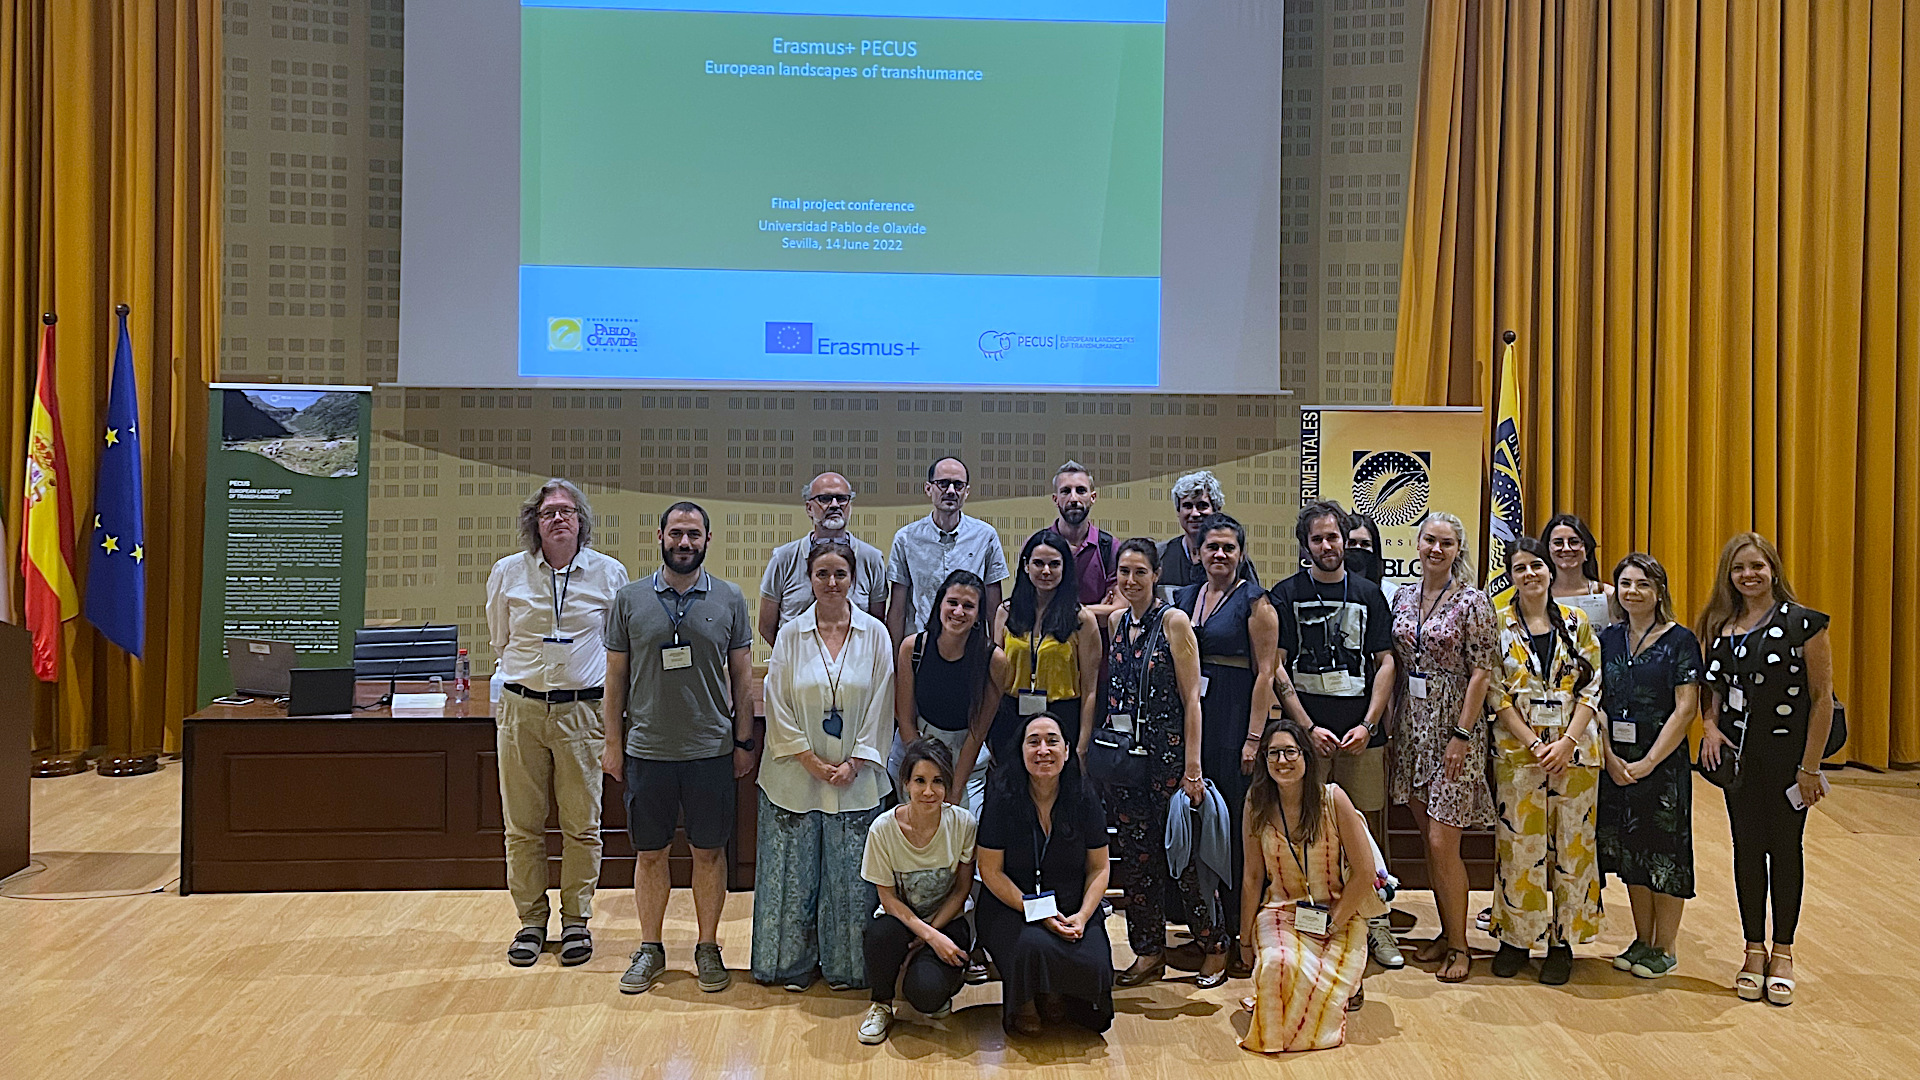 Final conference of the Erasmus+ PECUS project